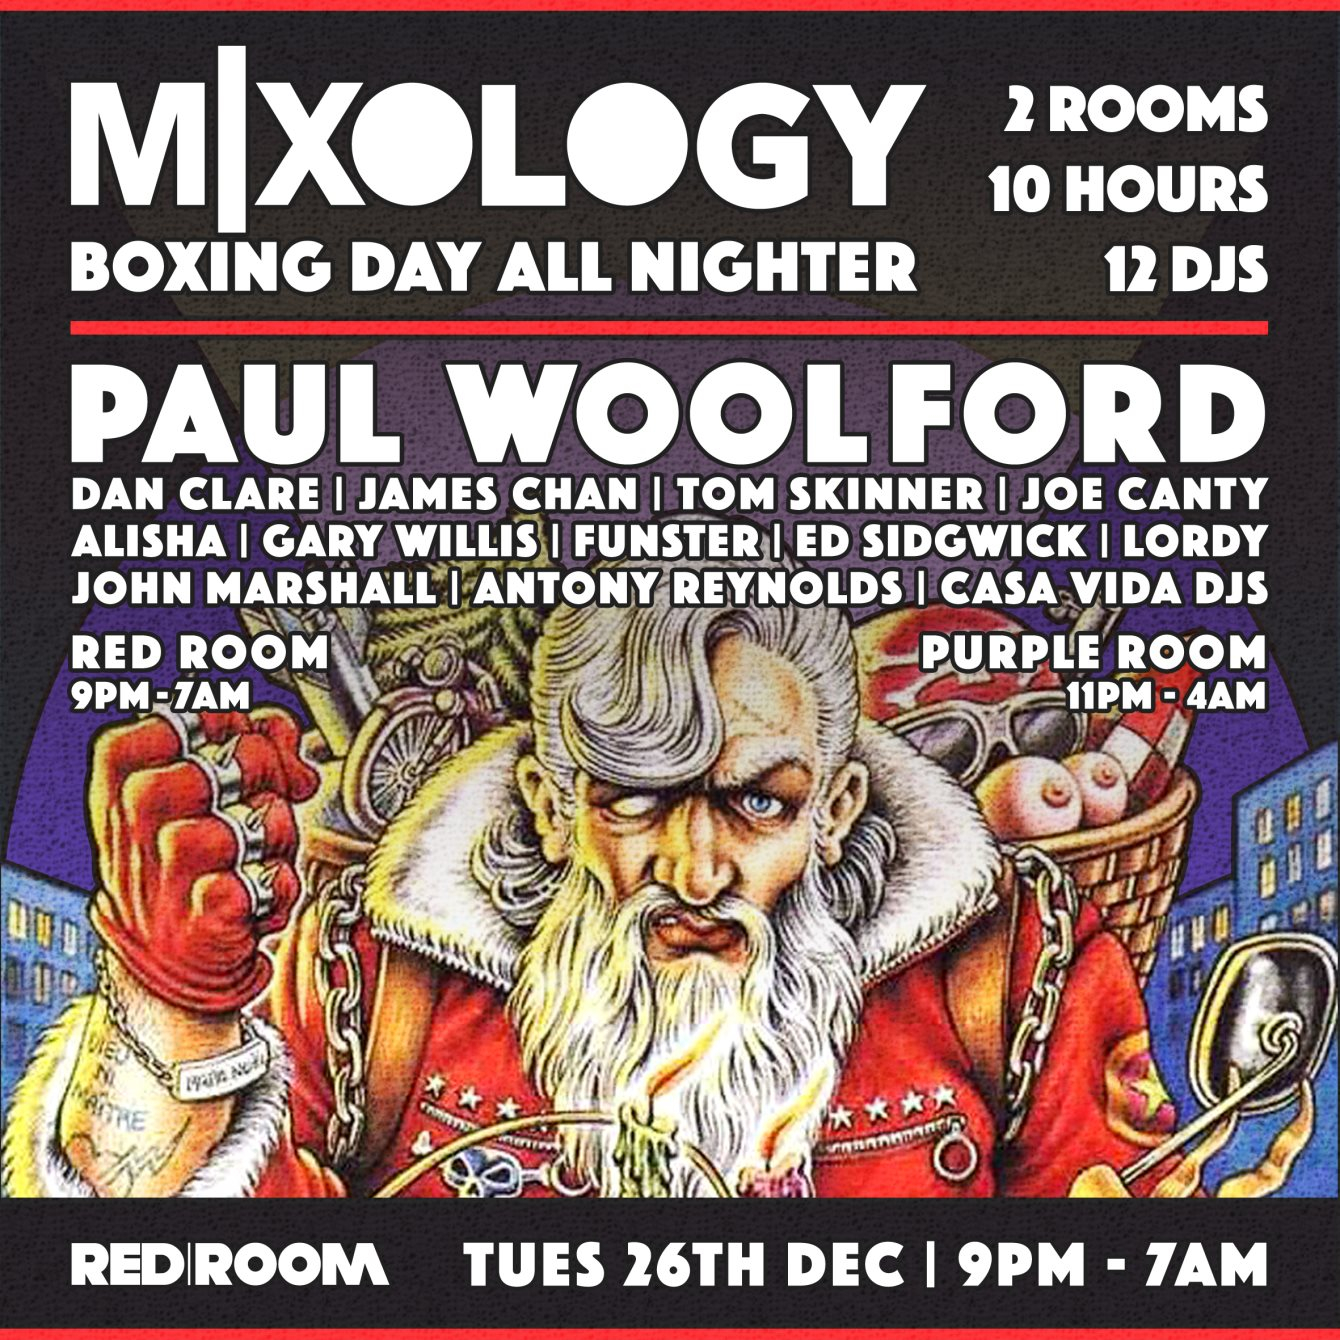 MIXOLOGY Boxing Day All Nighter with Paul Woolford - Flyer front